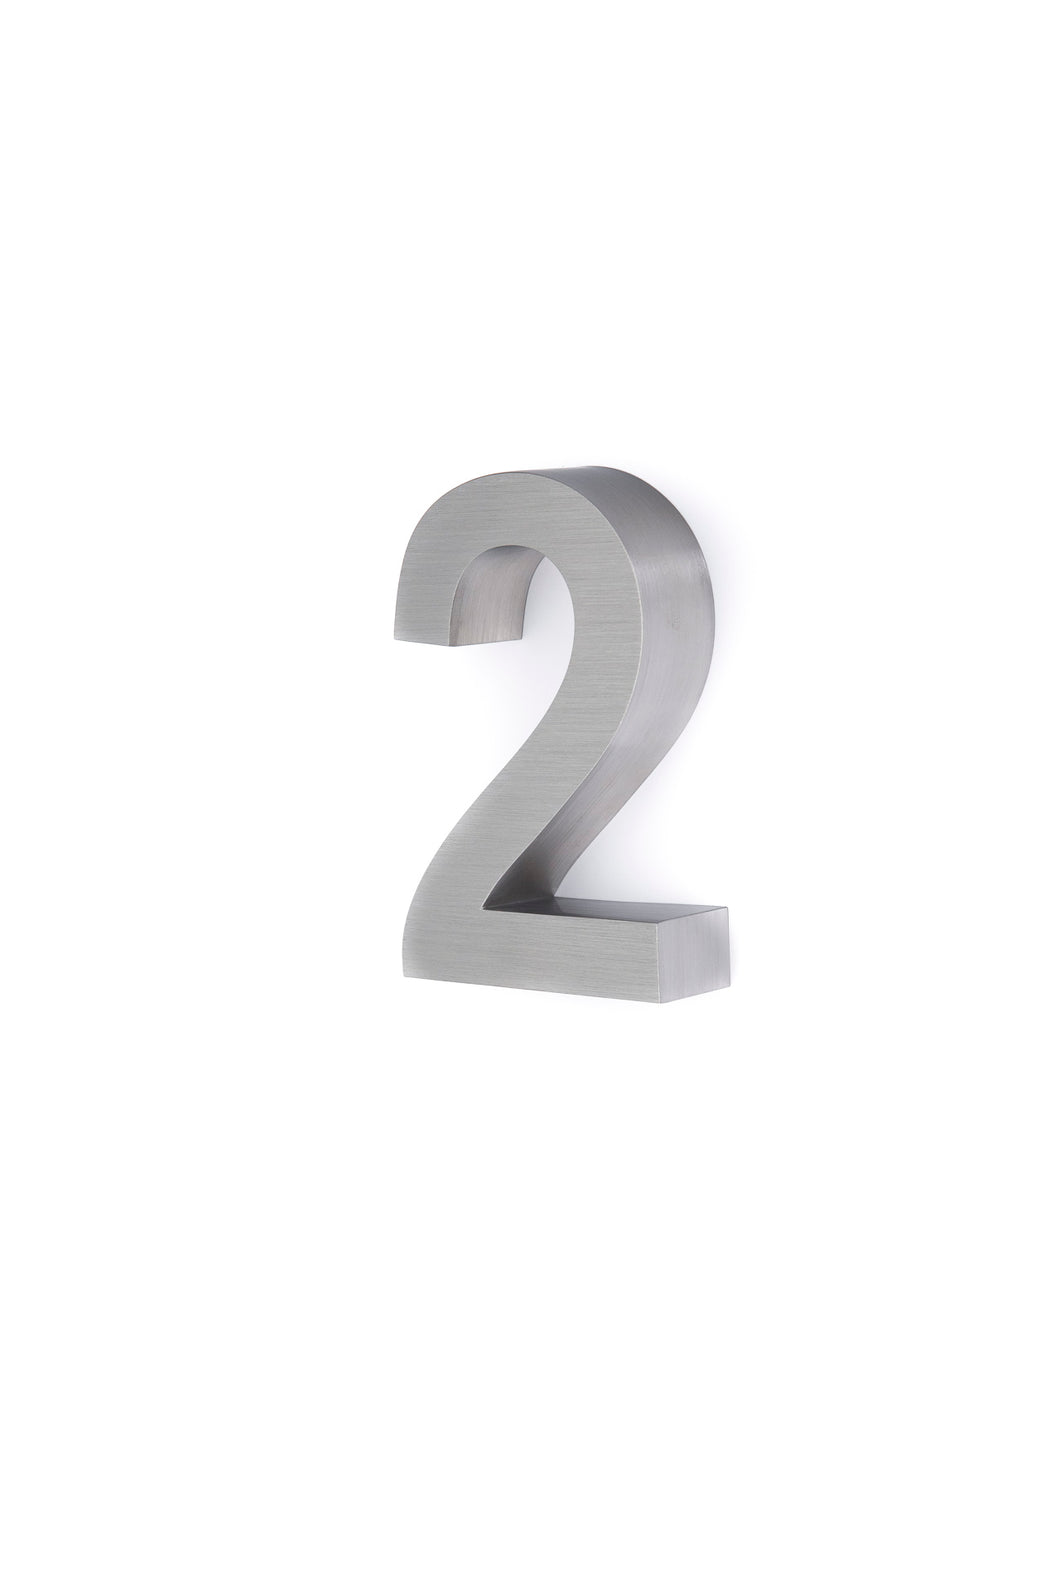 6 Inch 3D Stainless Steel House Number Two